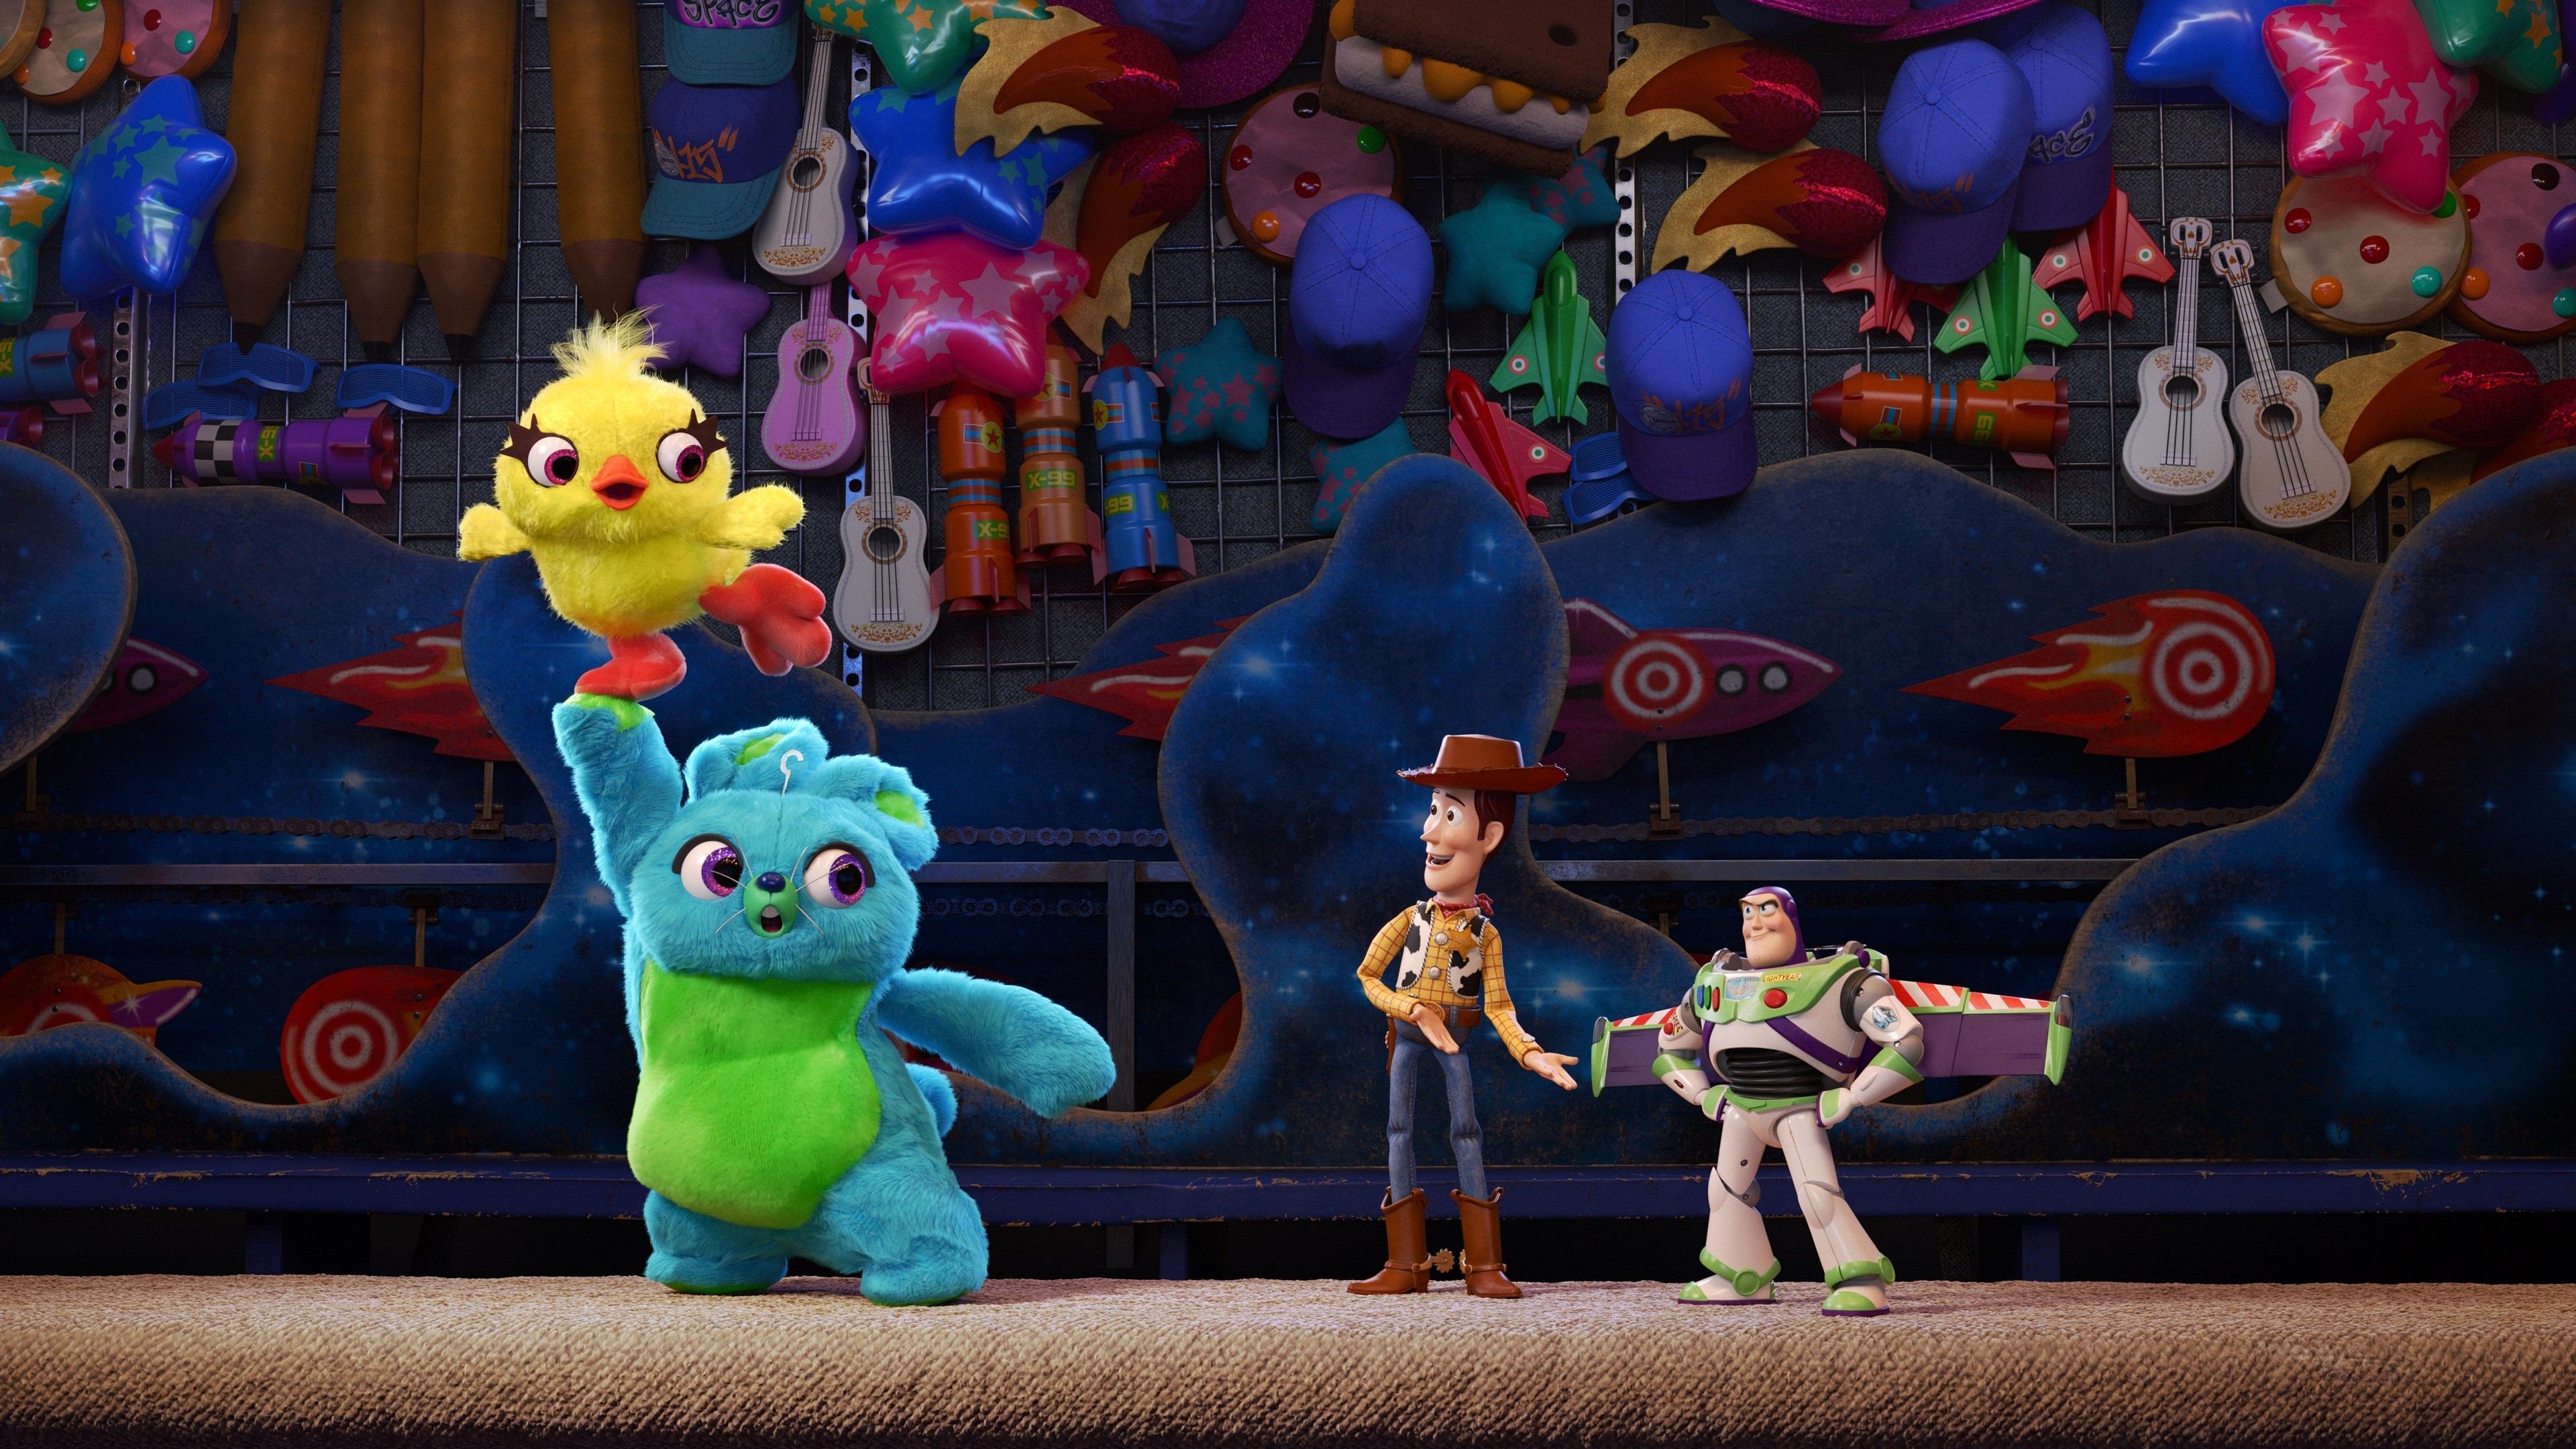 Toy Story 4 HQ Background Wallpaper